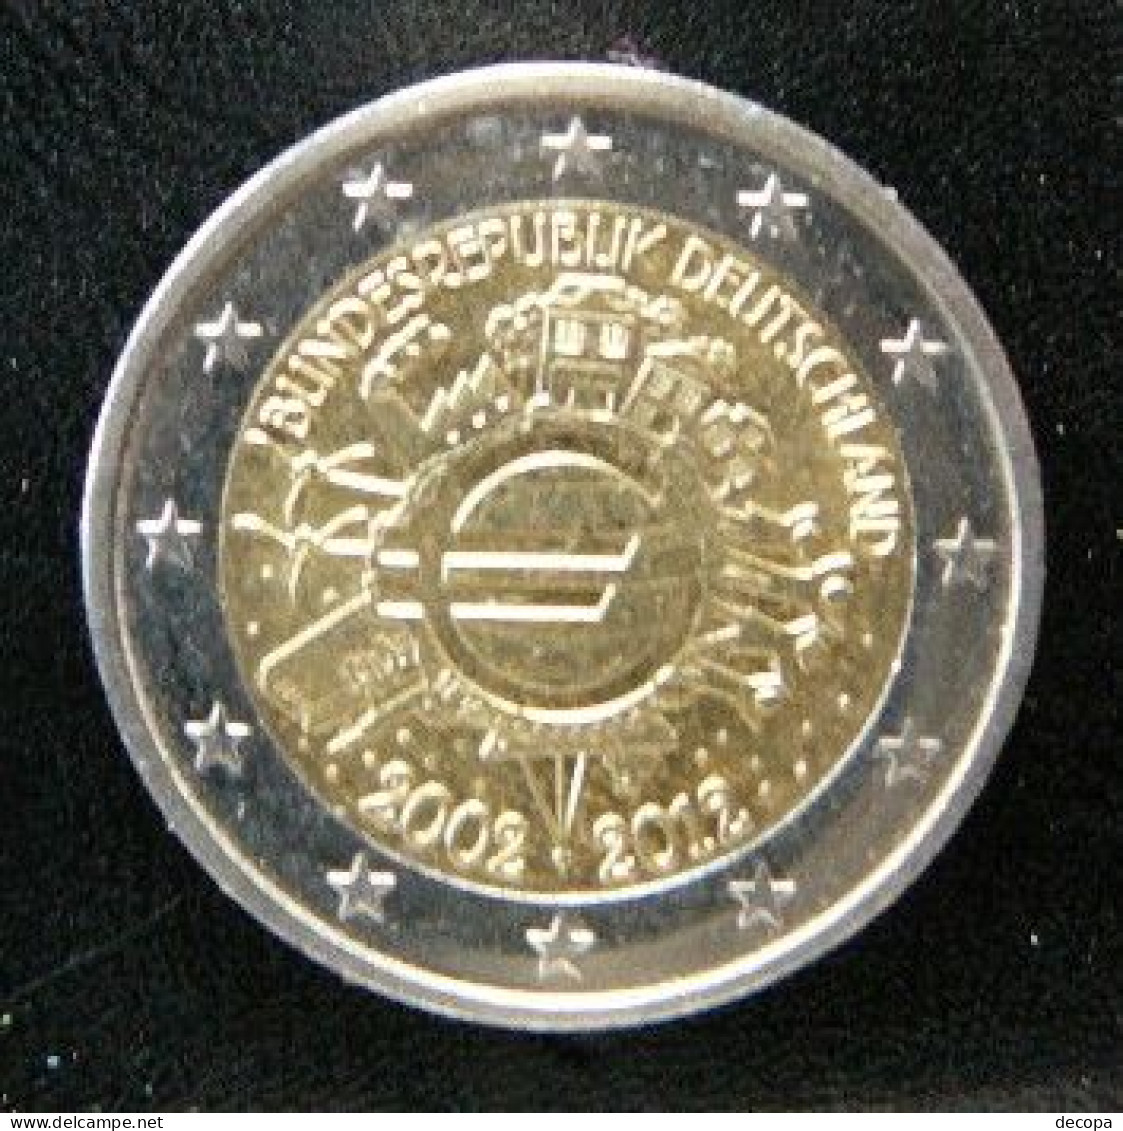 Germany - Allemagne - Duitsland   2 EURO 2012 F   10 Years Euro      Speciale Uitgave - Commemorative - Germany